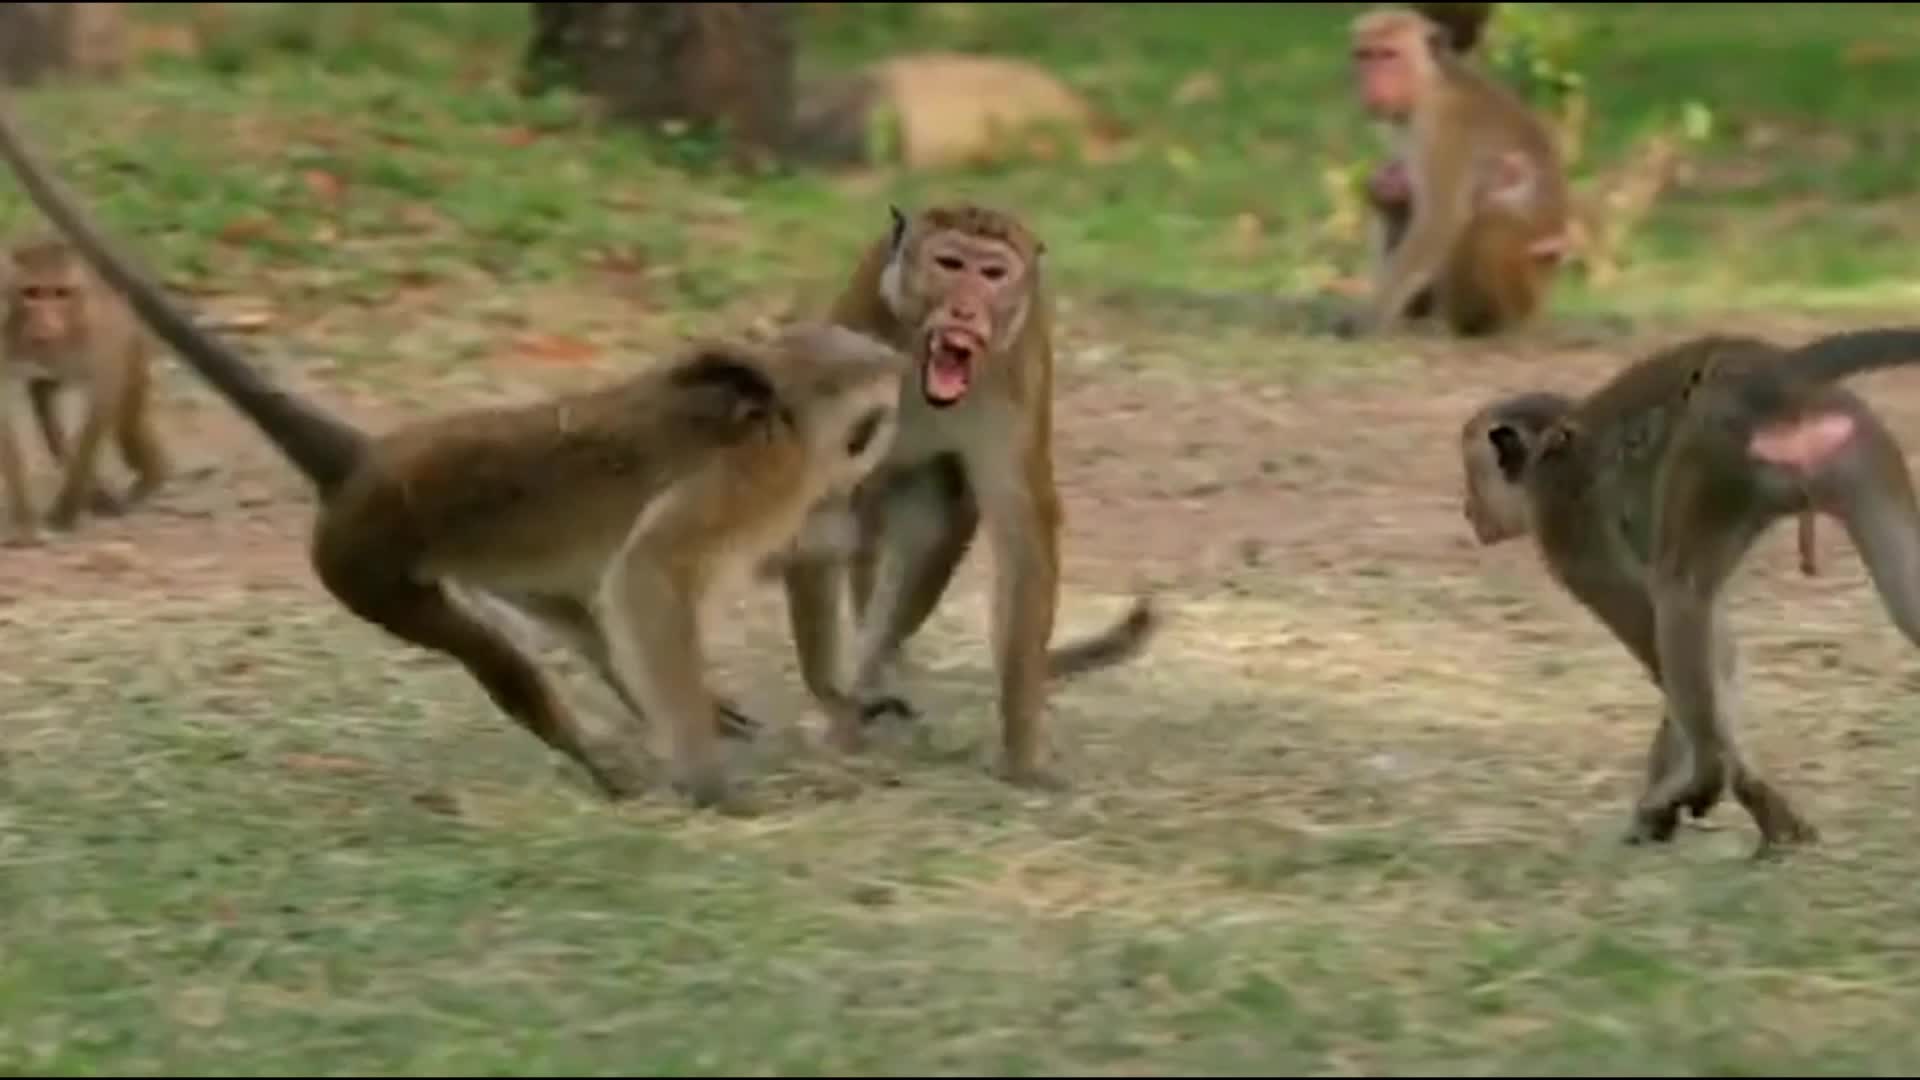 Macaques show sharp canine teeth in fierce competition for food